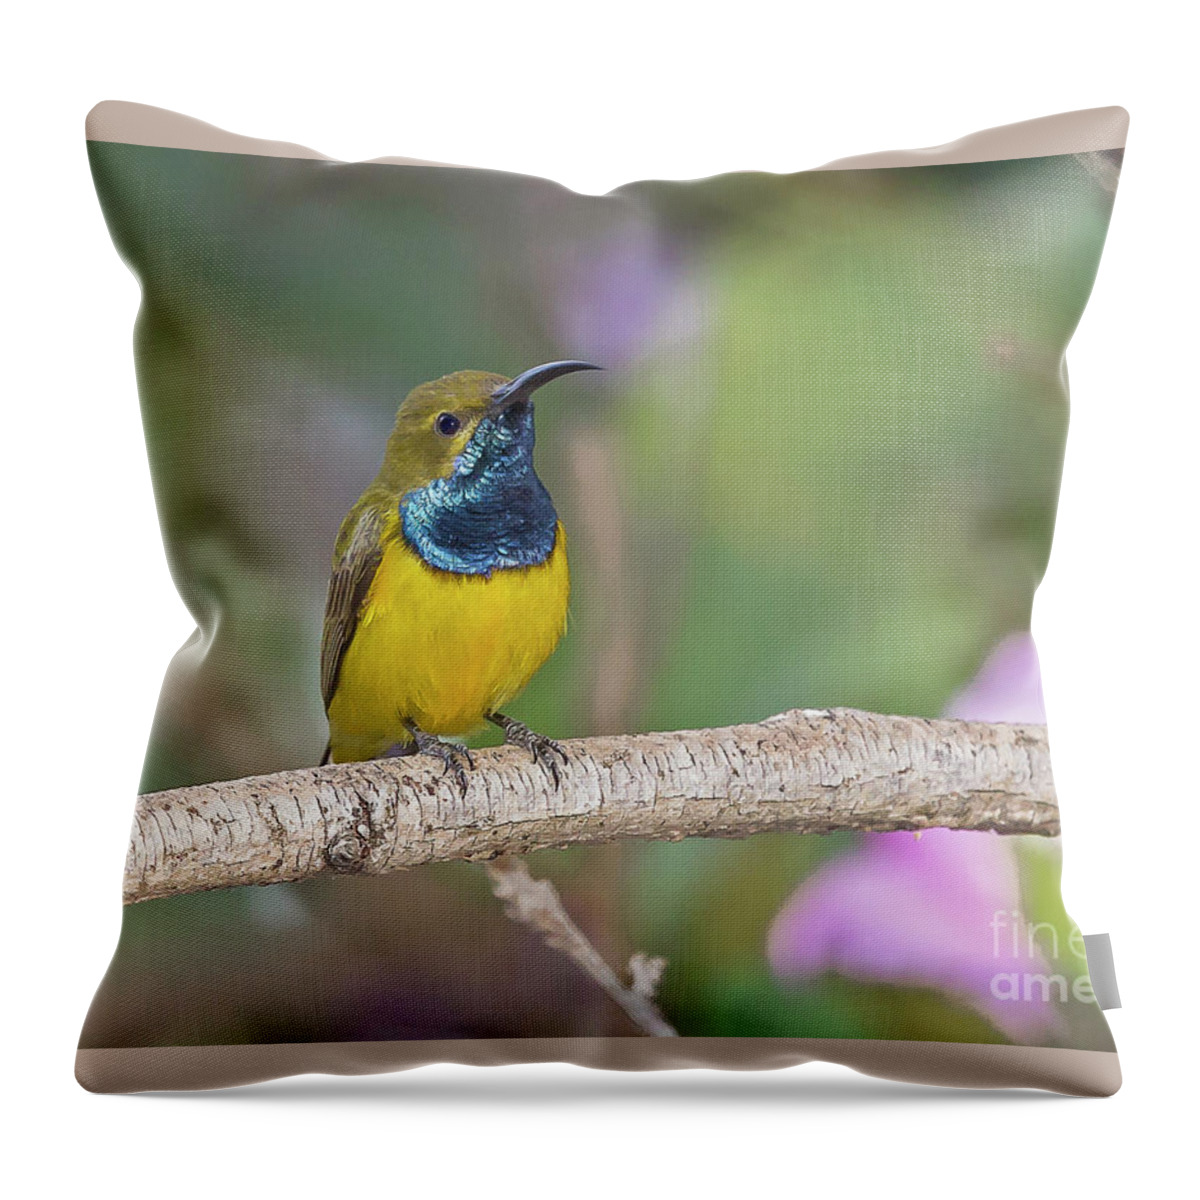 2014 Throw Pillow featuring the photograph Olive-backed Sunbird by Jean-Luc Baron